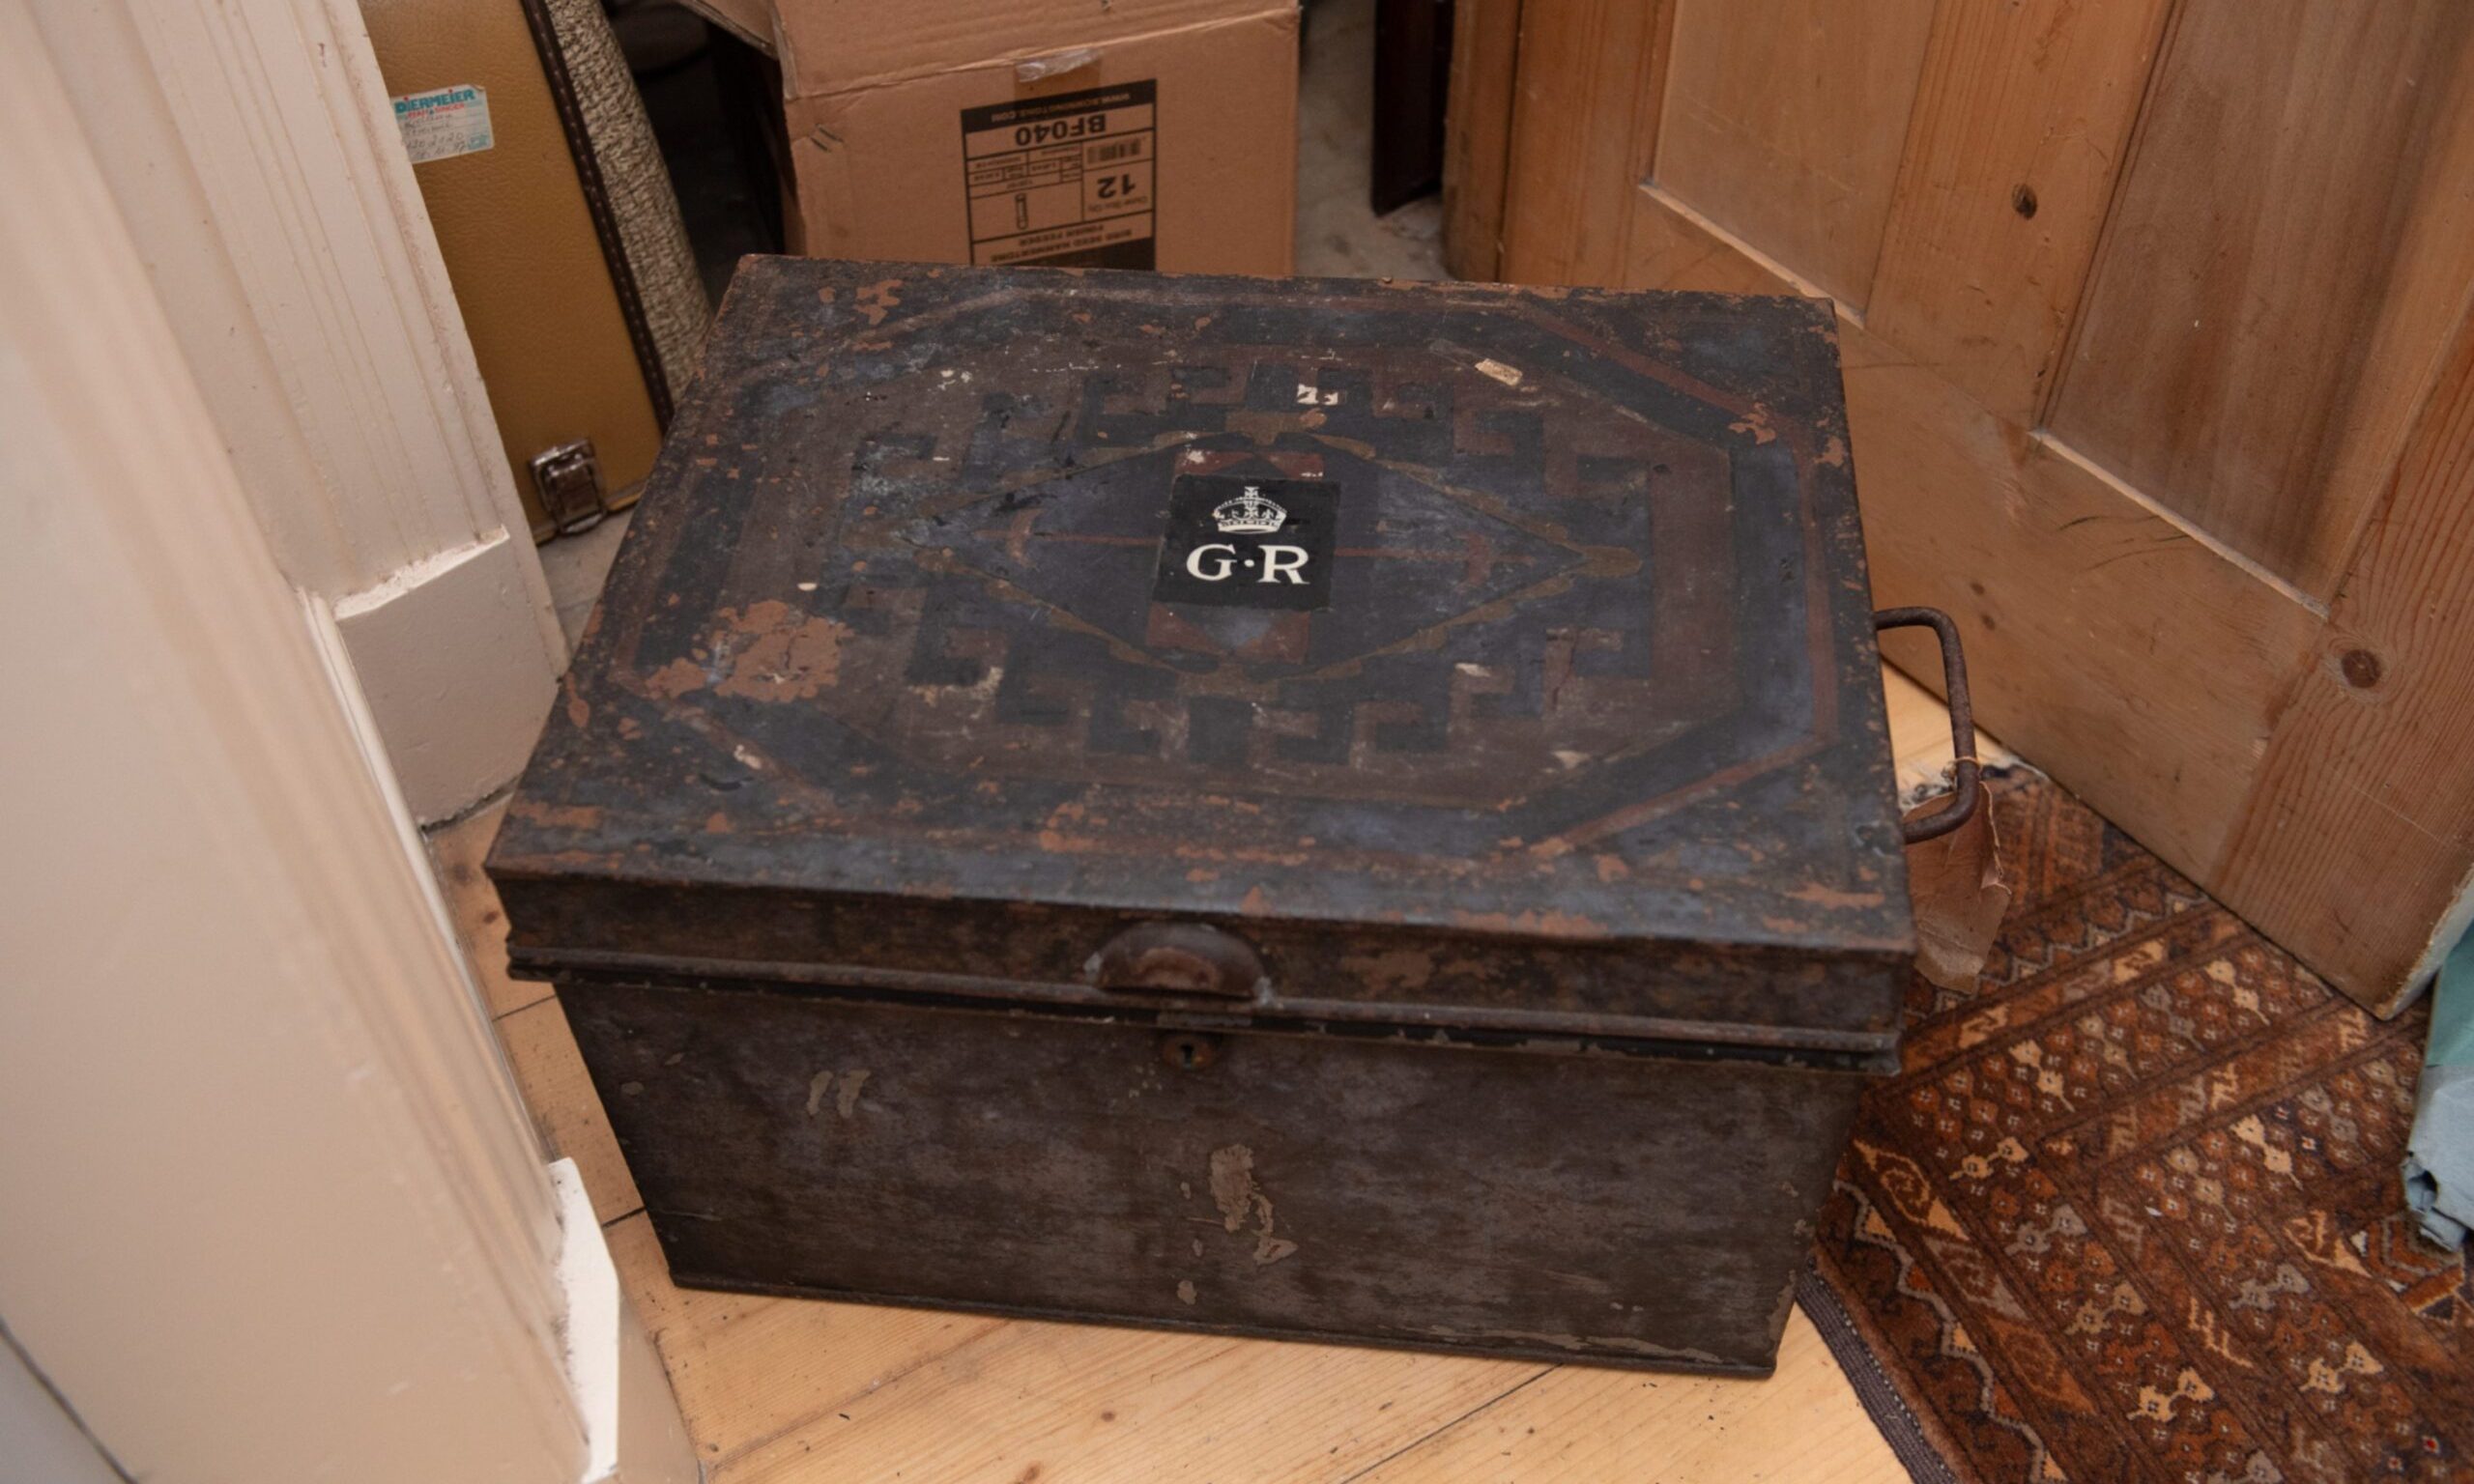 Black despatch box on ground with GR insignia on top. 